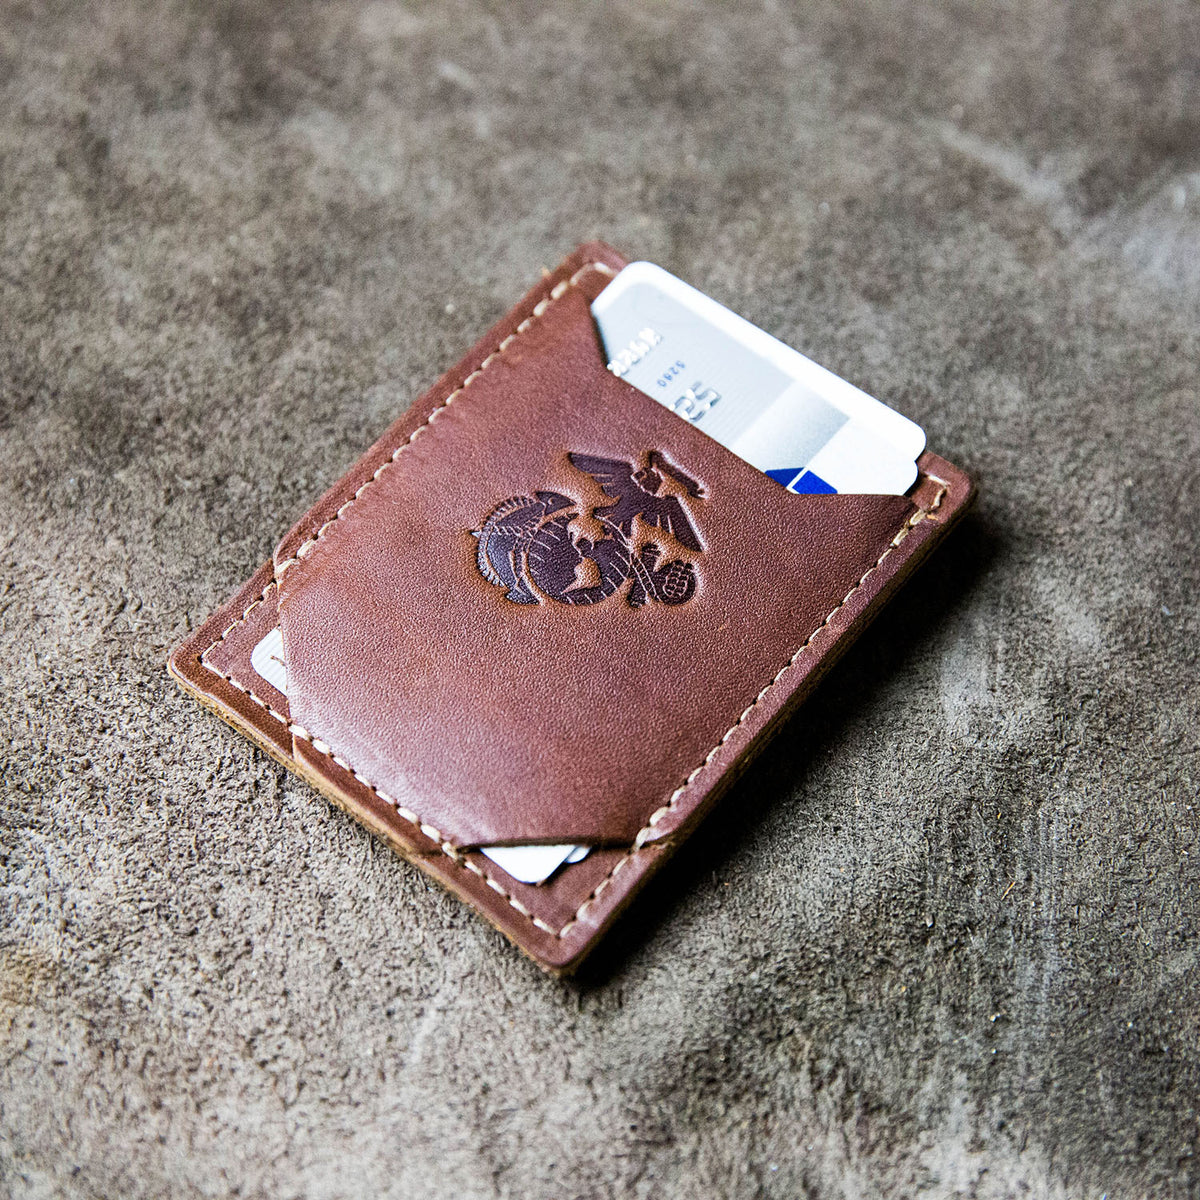 Money clip front pocket wallet with Marine Corps logo